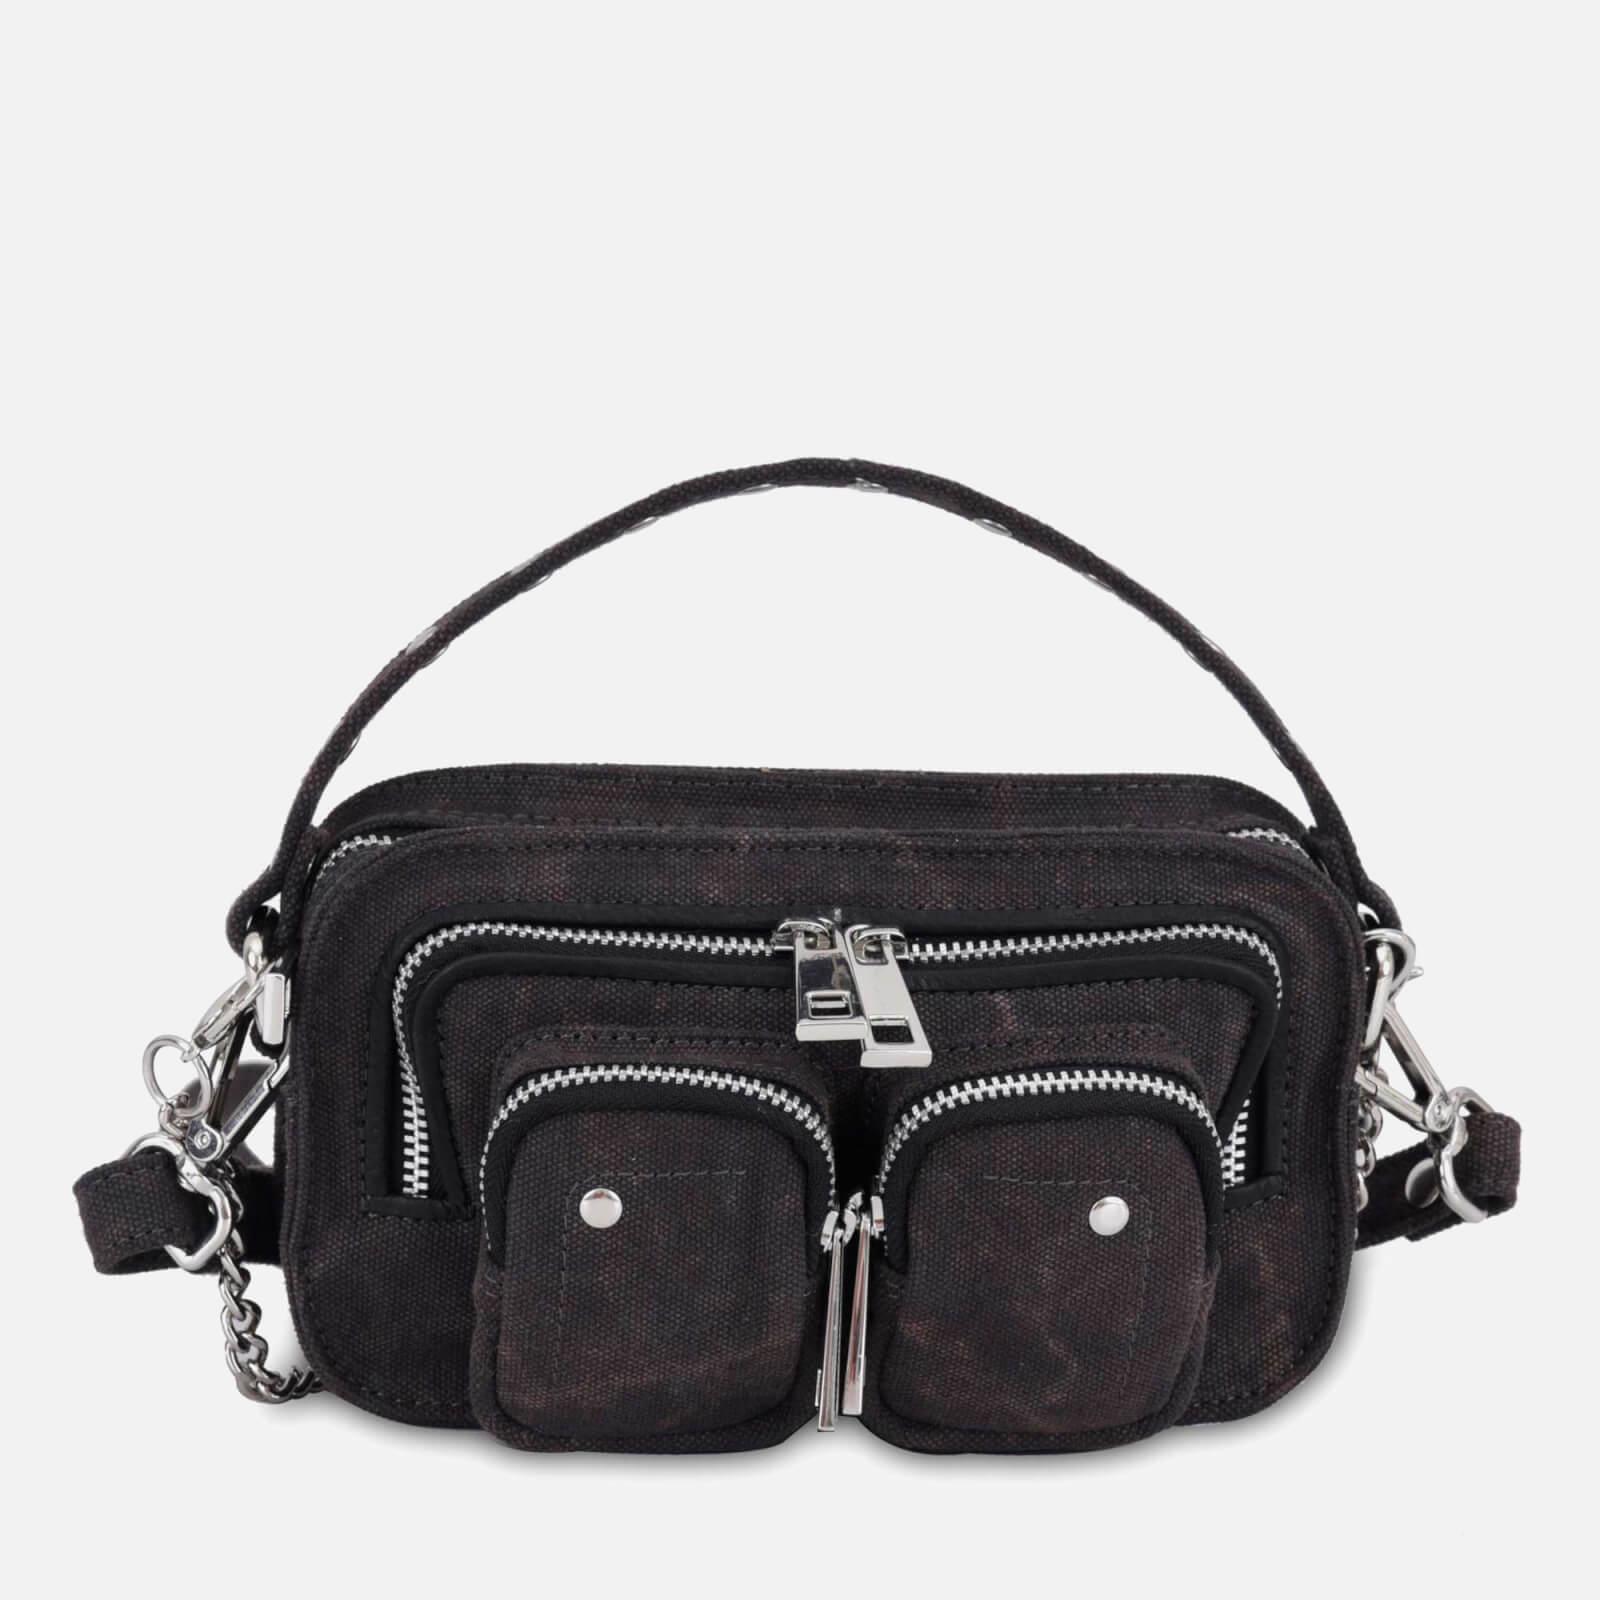 Nunoo Helena Recycled Canvas Bag in Black | Lyst